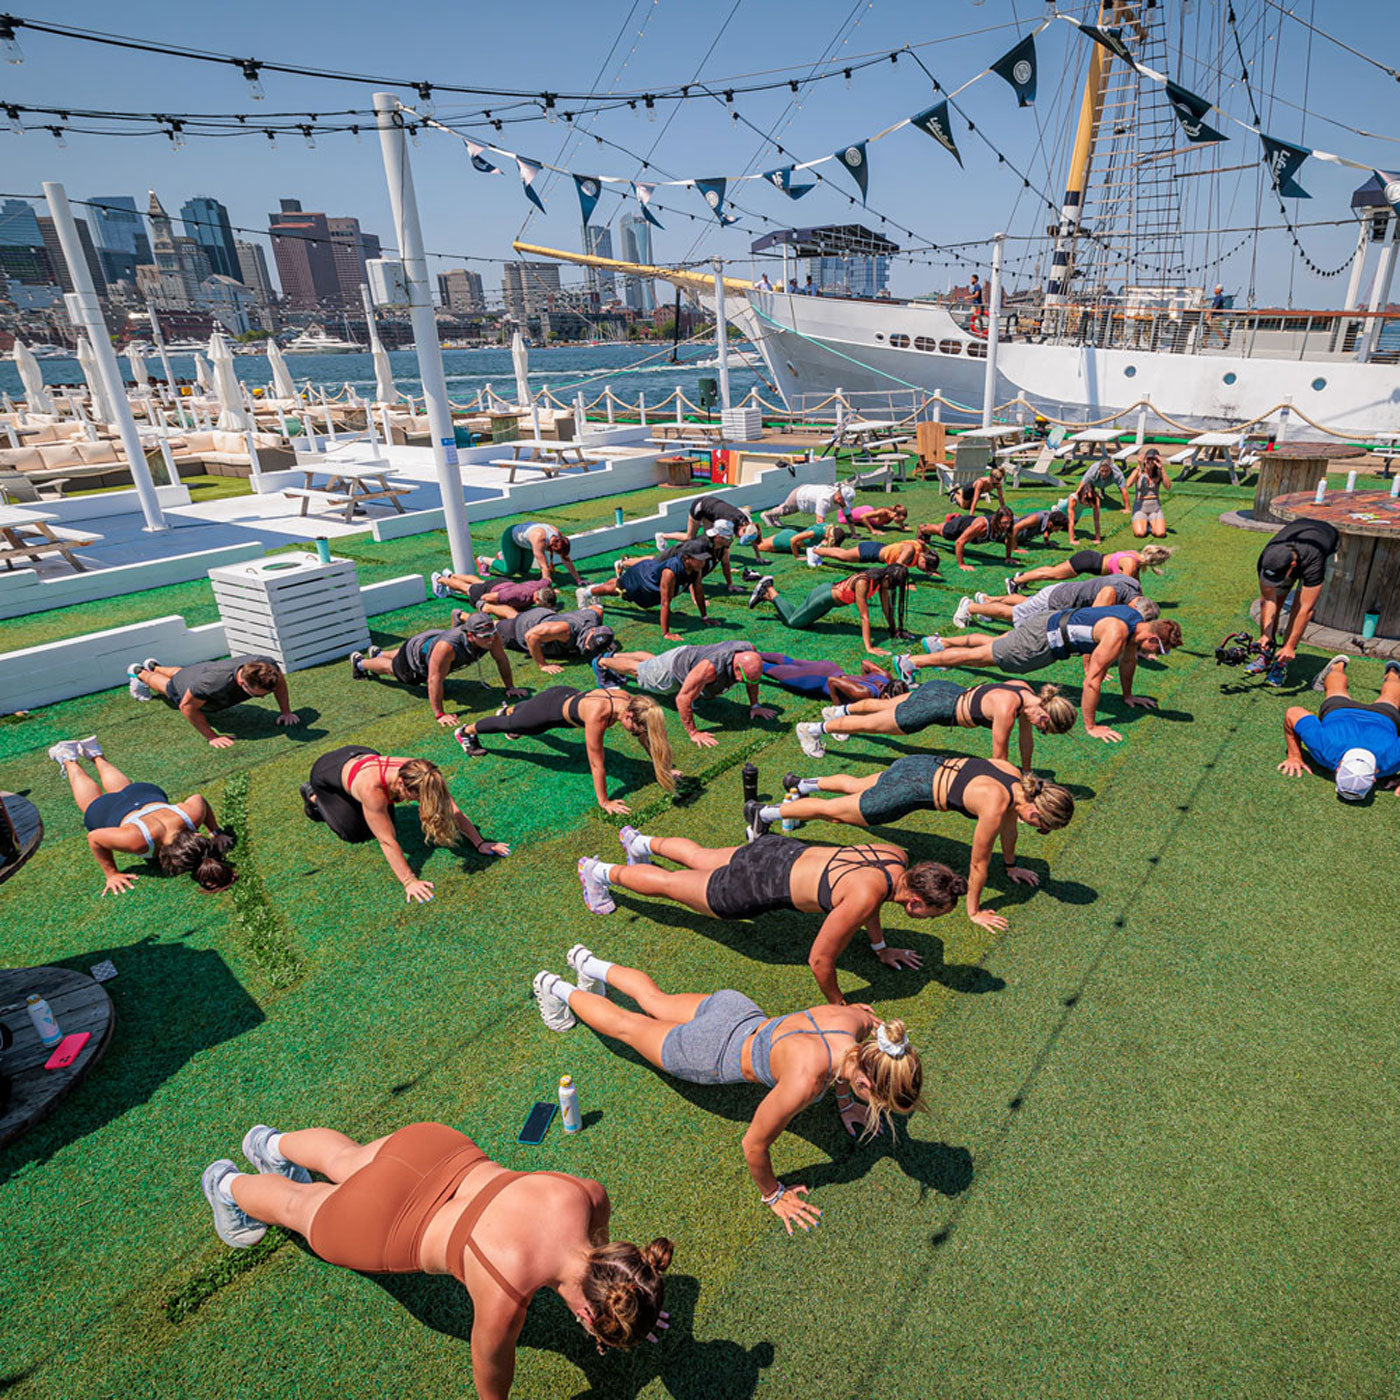 a picture of a group of people doing push ups in a large outdoor area